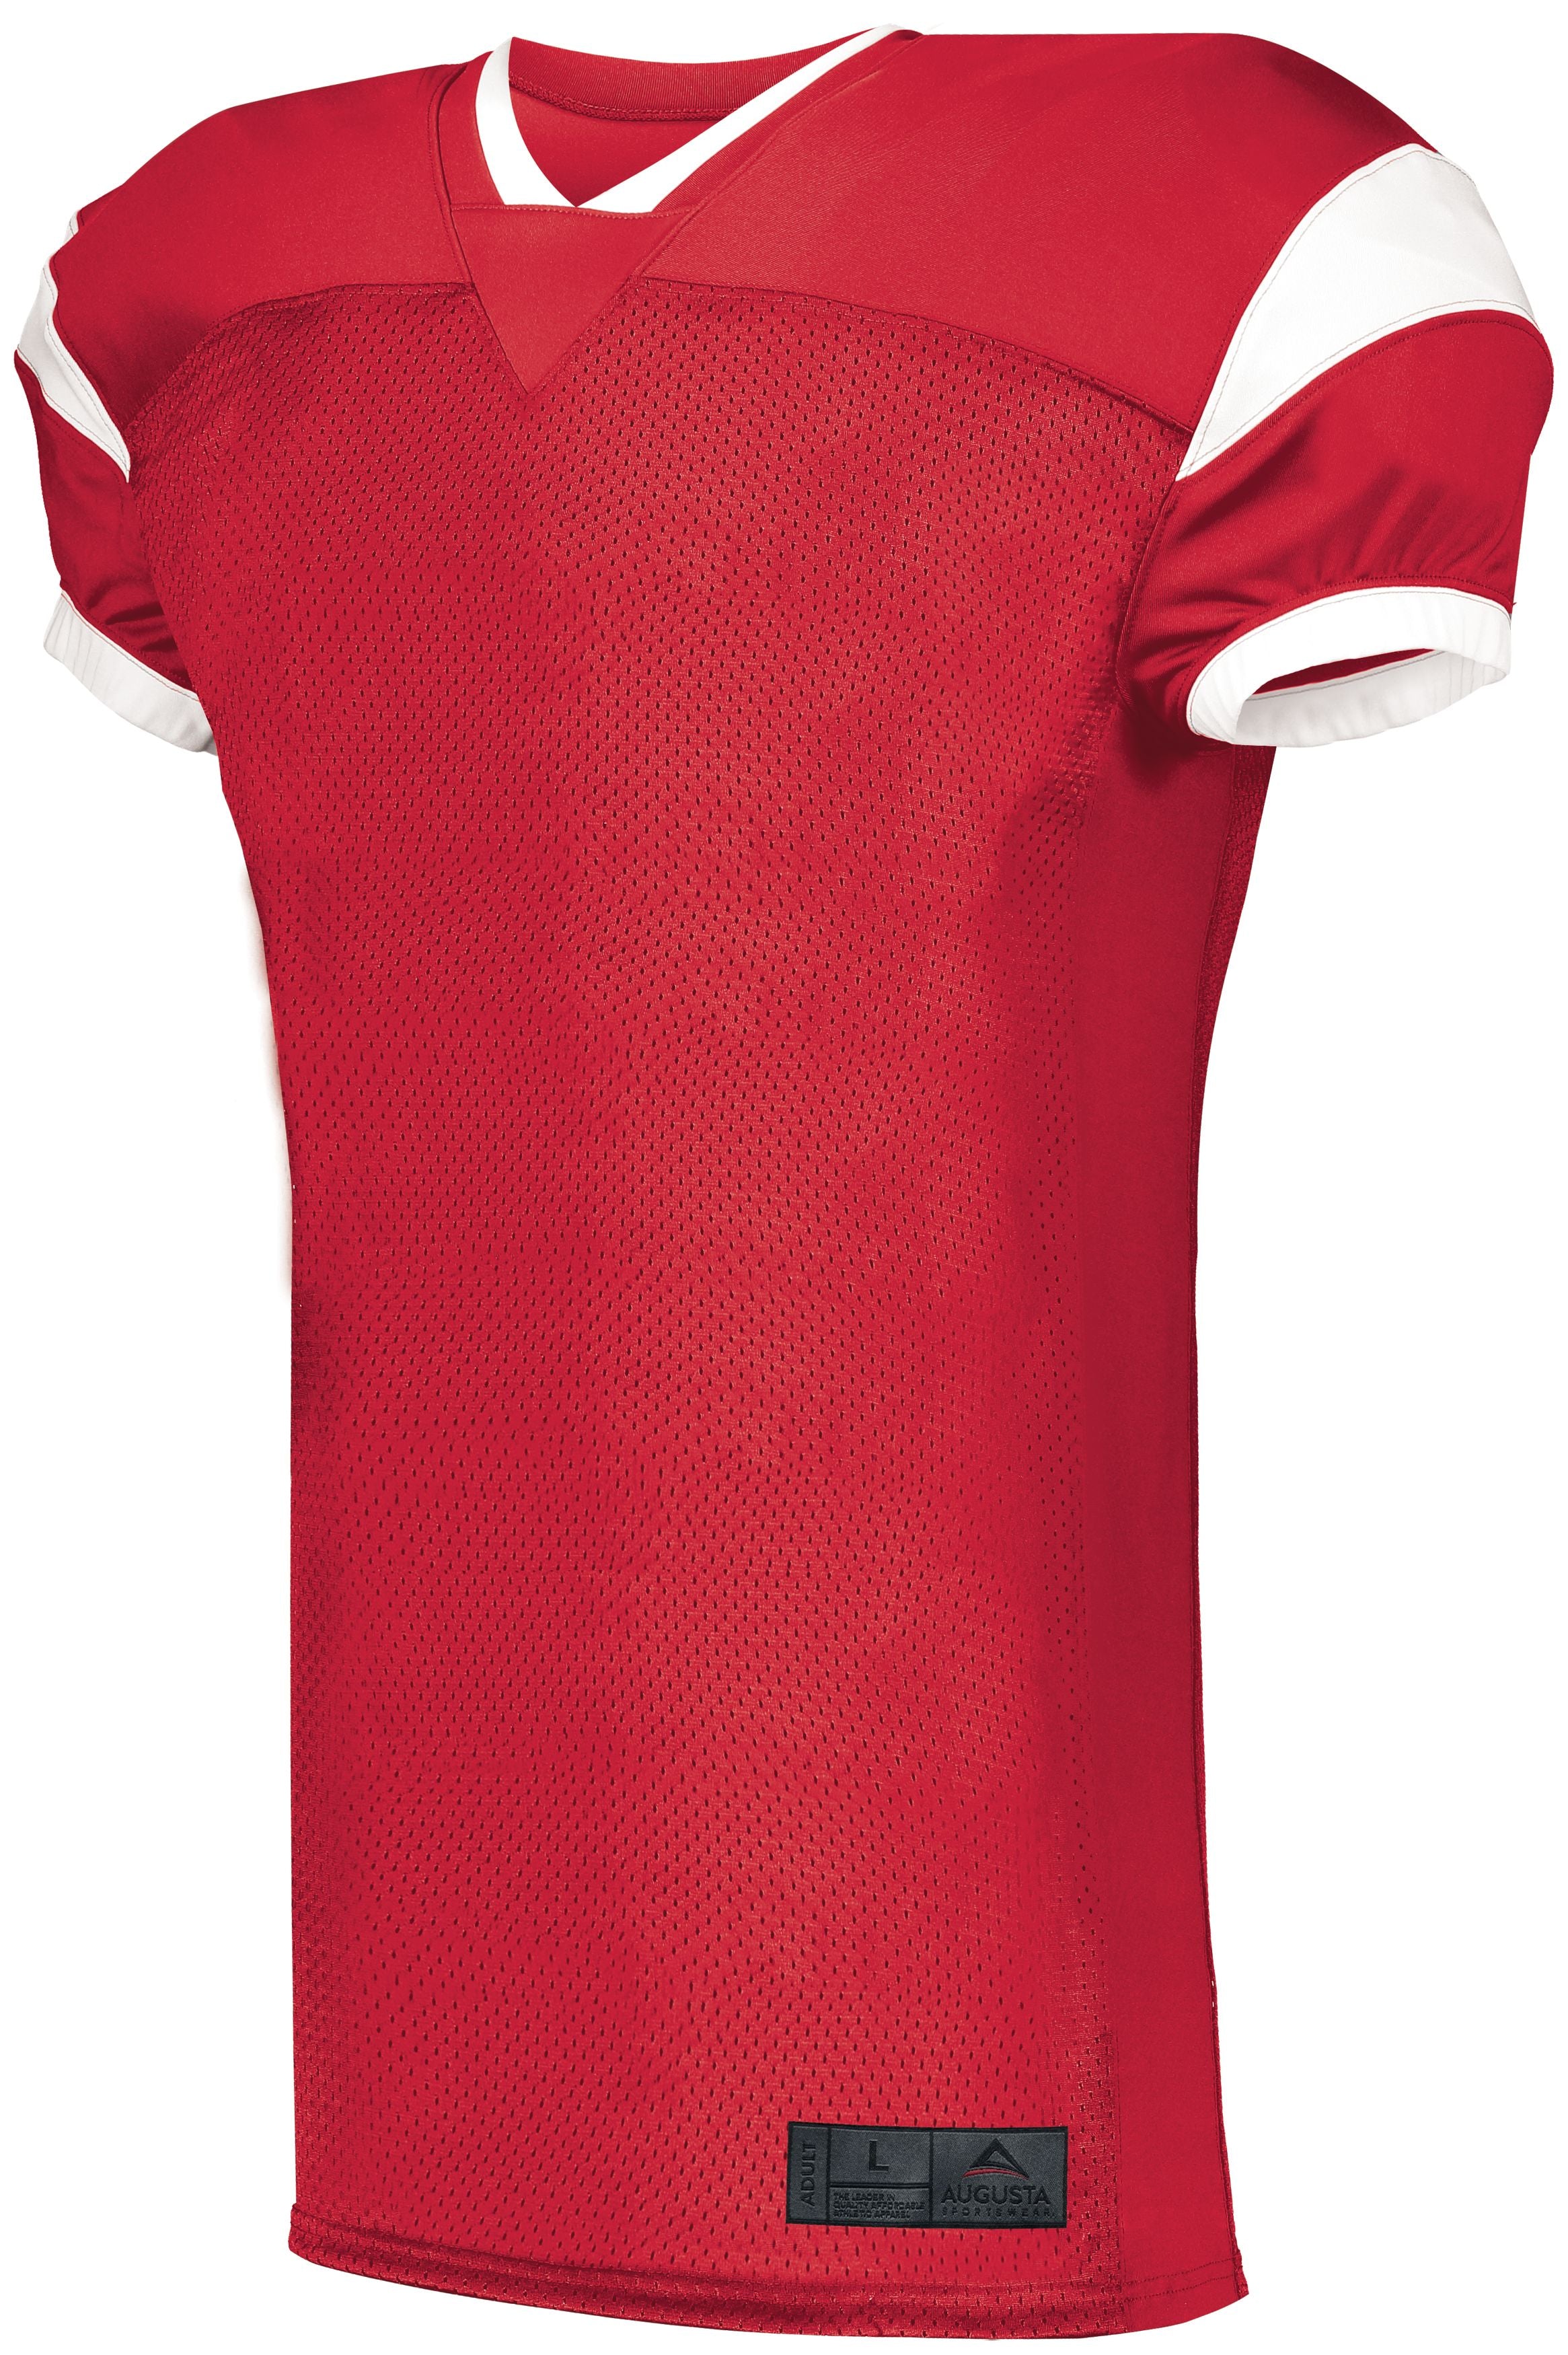 Augusta Sportswear Youth Slant Football Jersey in Red/White  -Part of the Youth, Youth-Jersey, Augusta-Products, Football, Shirts, All-Sports, All-Sports-1 product lines at KanaleyCreations.com